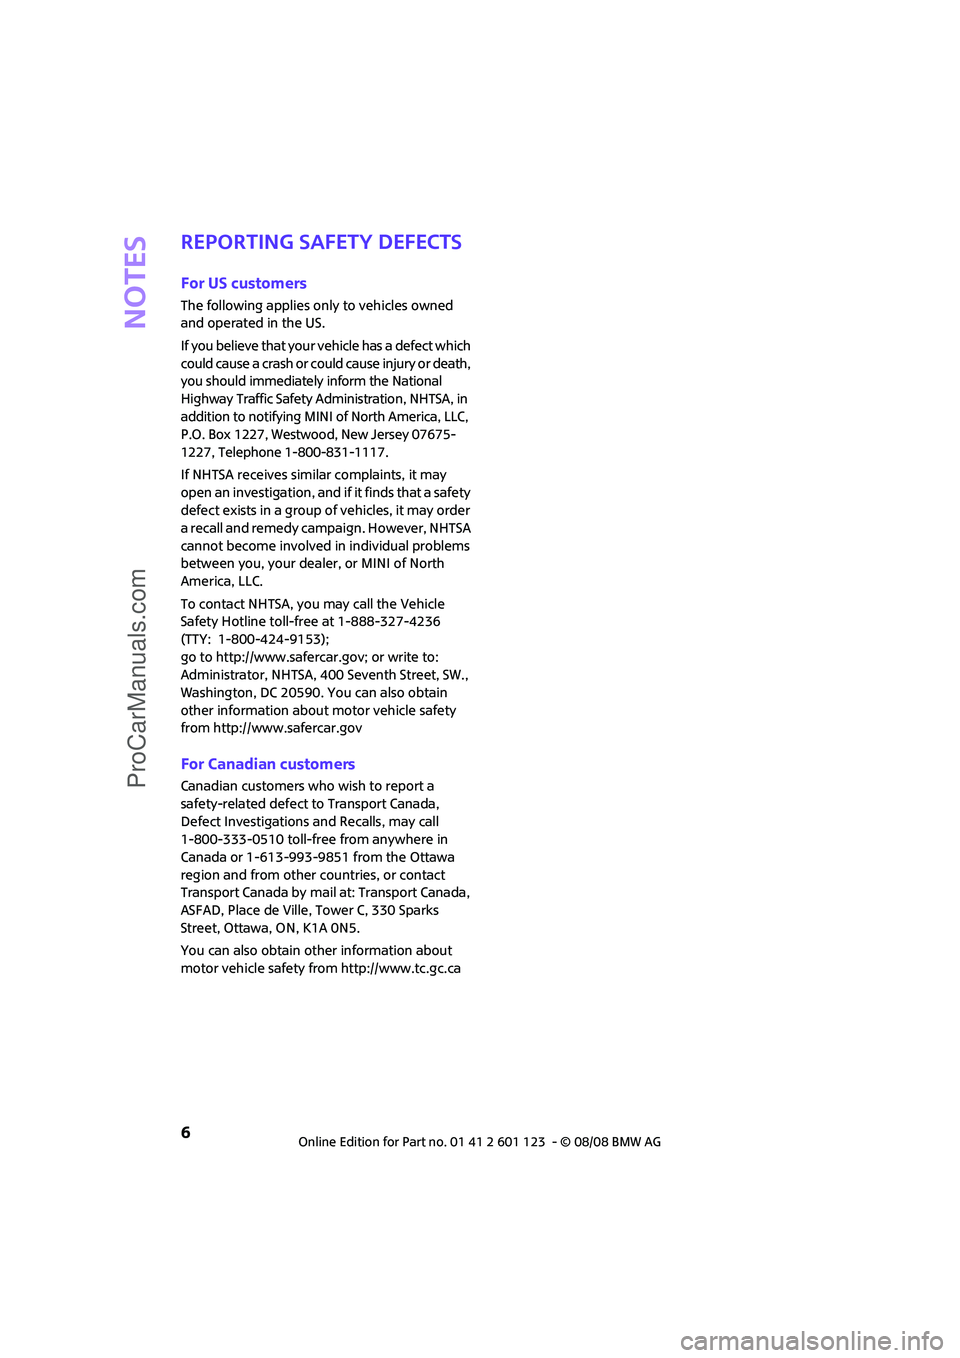 MINI COOPER 2009  Owners Manual Notes
6
Reporting safety defects
For US customers
The following applies only to vehicles owned 
and operated in the US.
If you believe that your vehicle has a defect which 
could cause a crash or coul